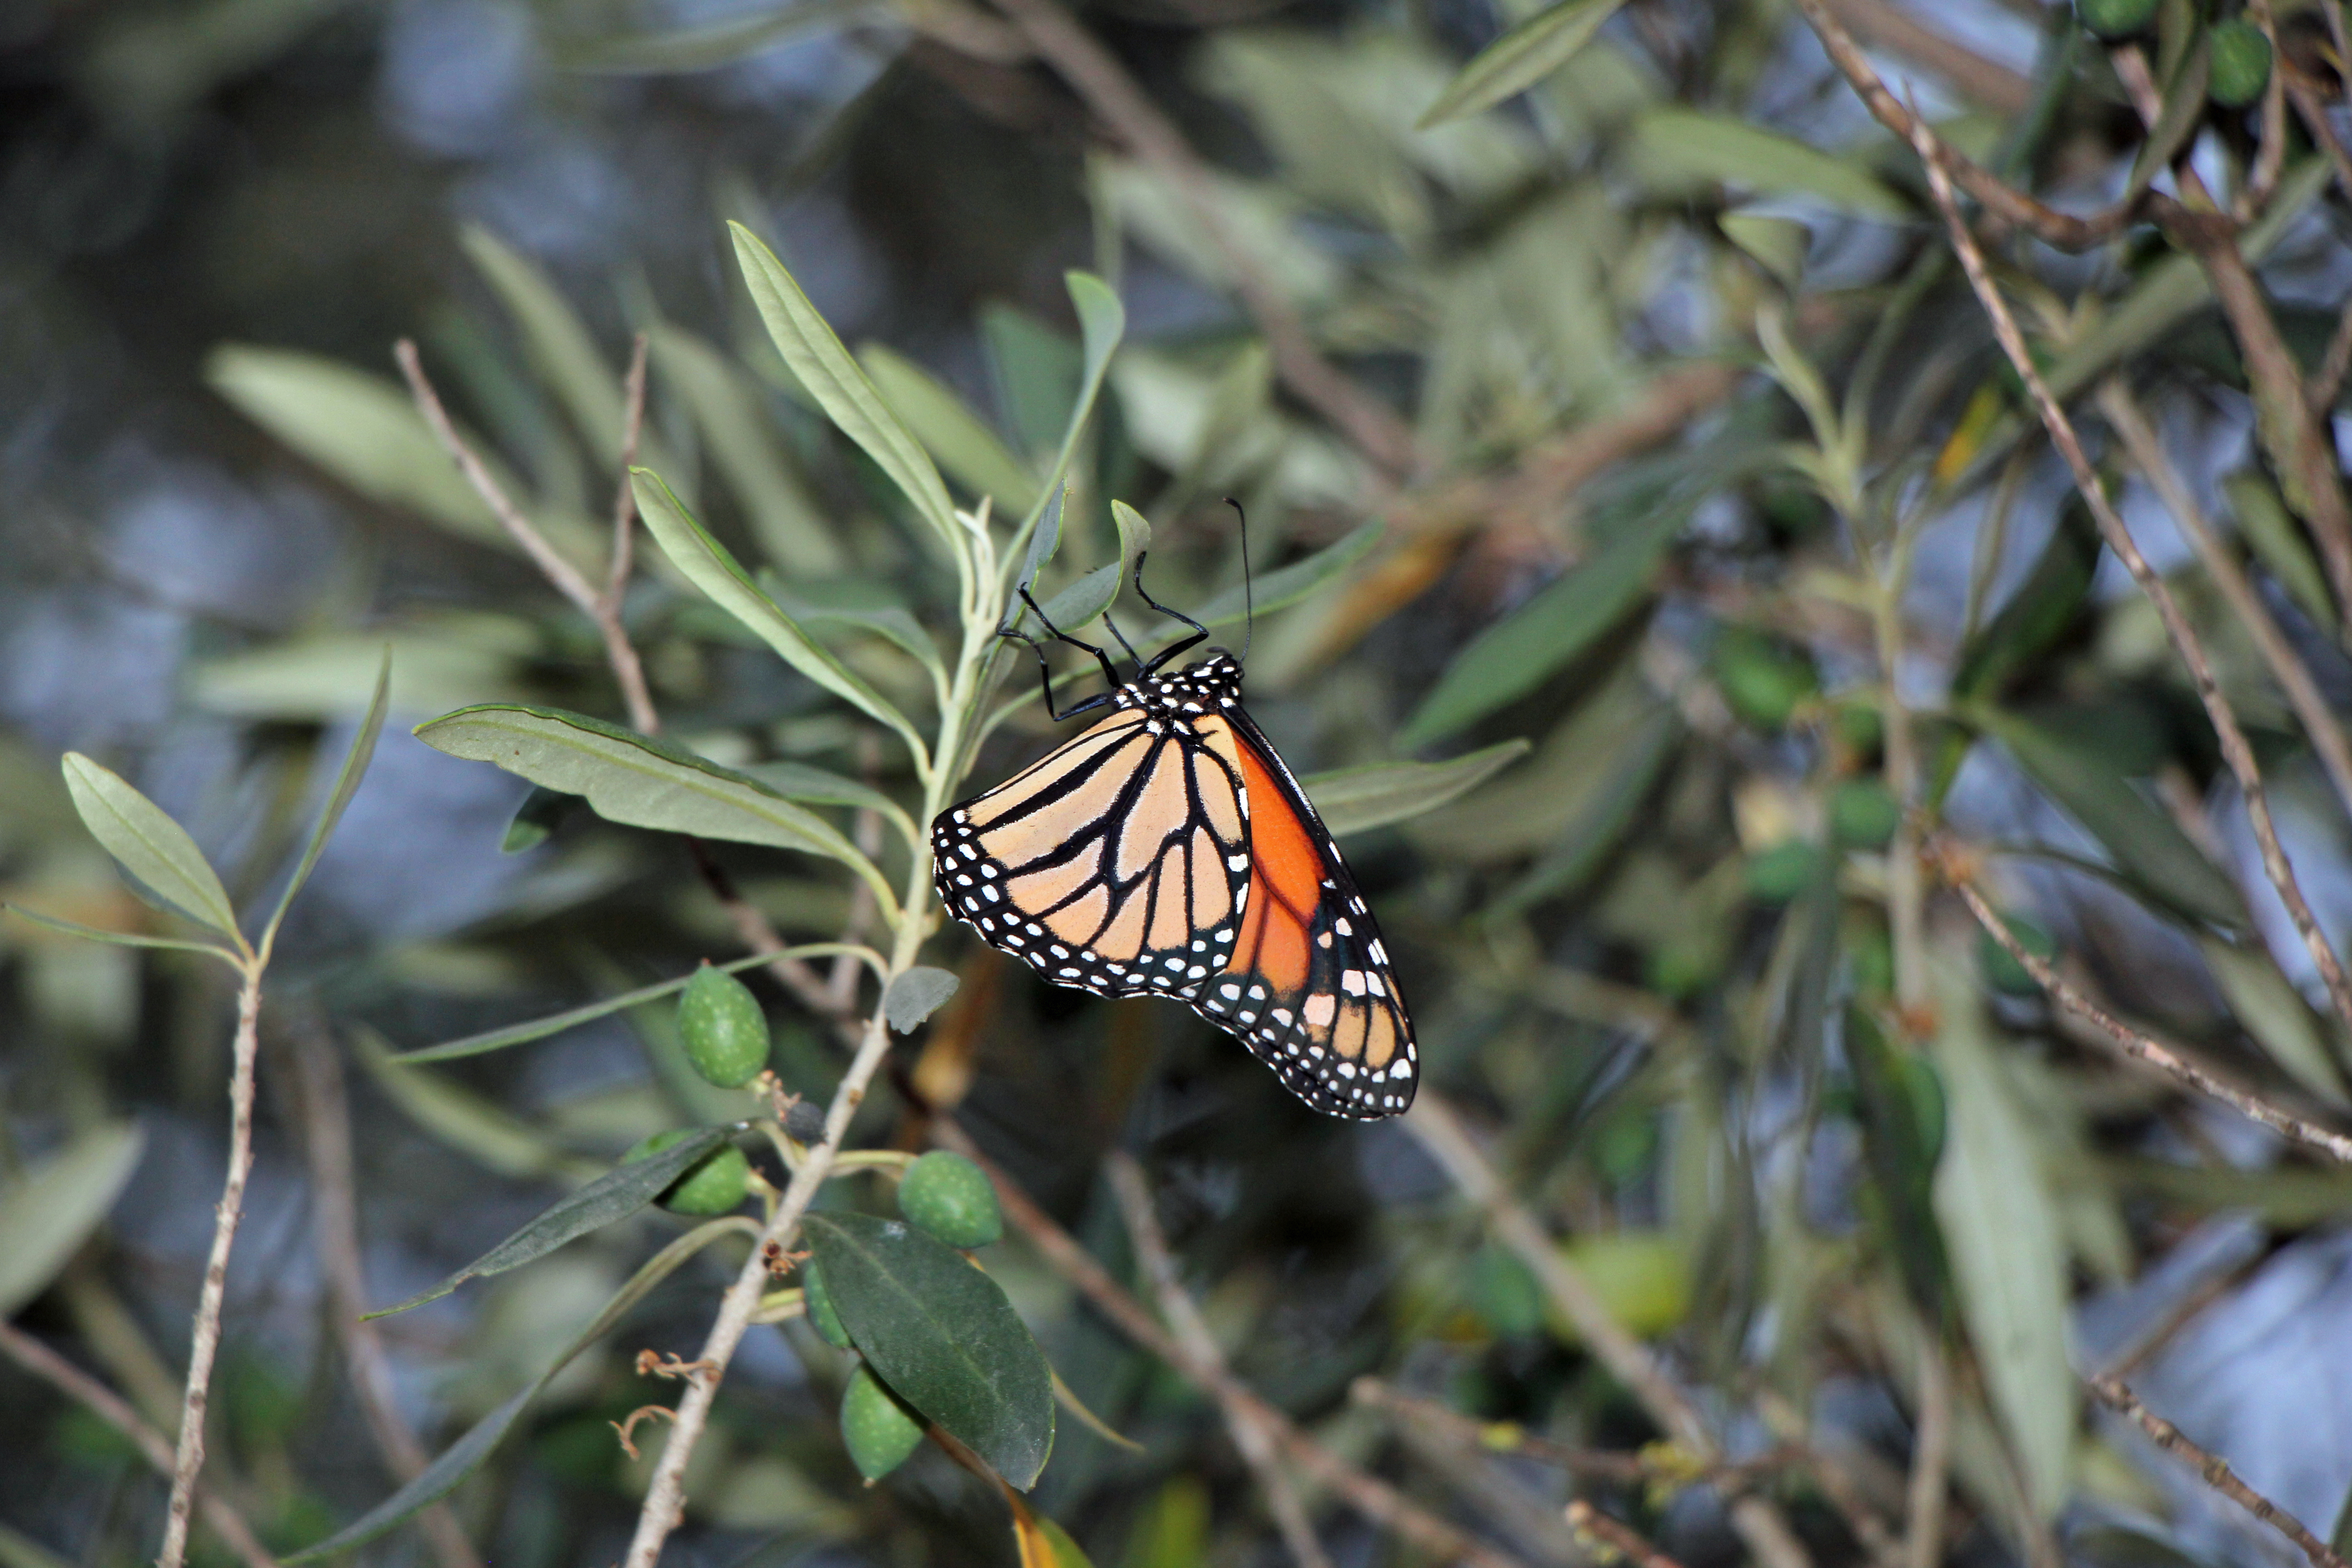 File:Butterfly in the olive tree (36631164130).jpg - Wikimedia Commons